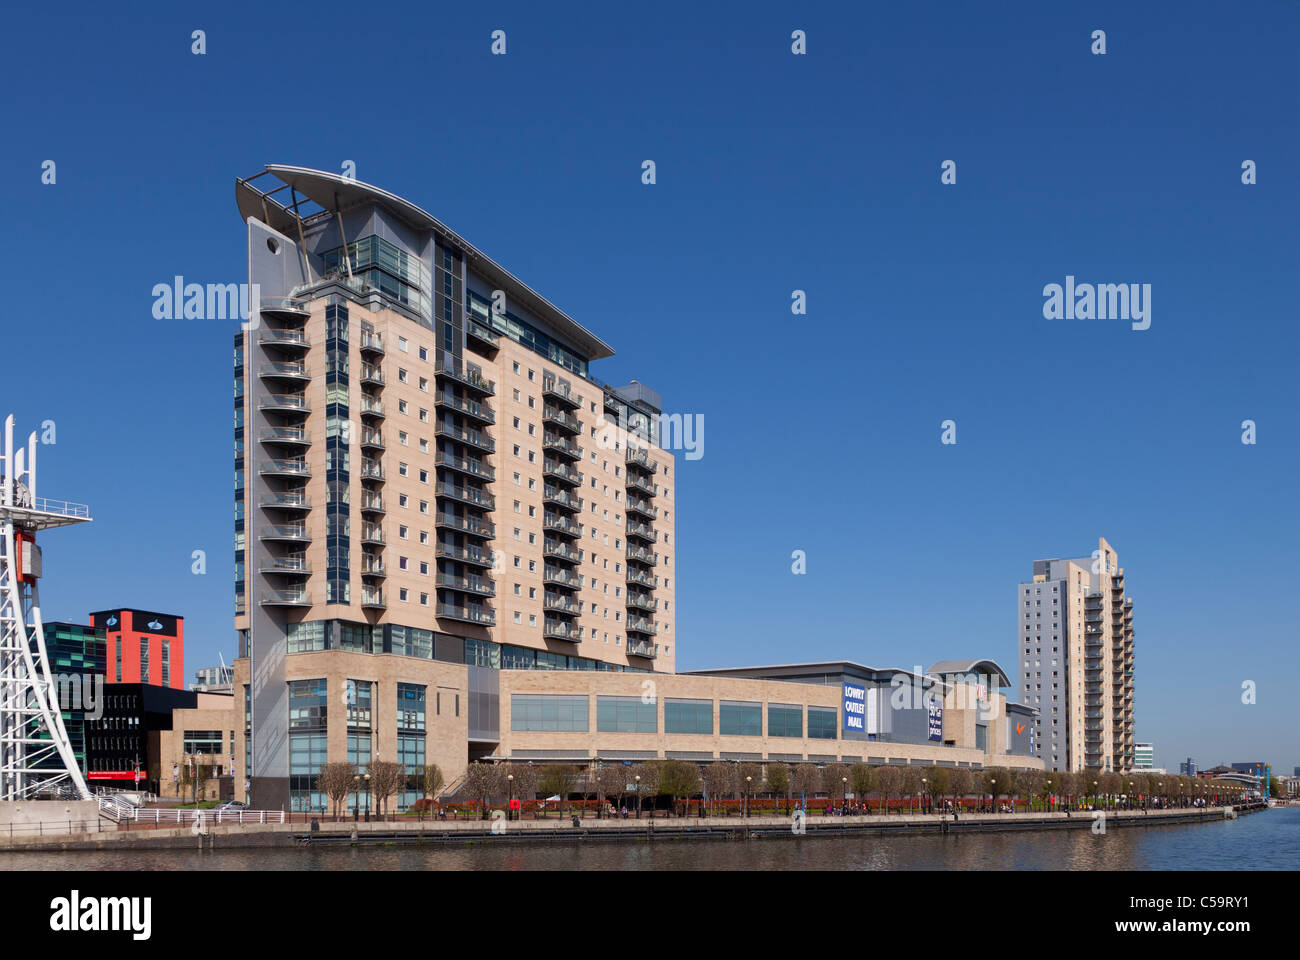 Lowry Outlet Mall, Salford quays, Greater Manchester, England Stock Photo